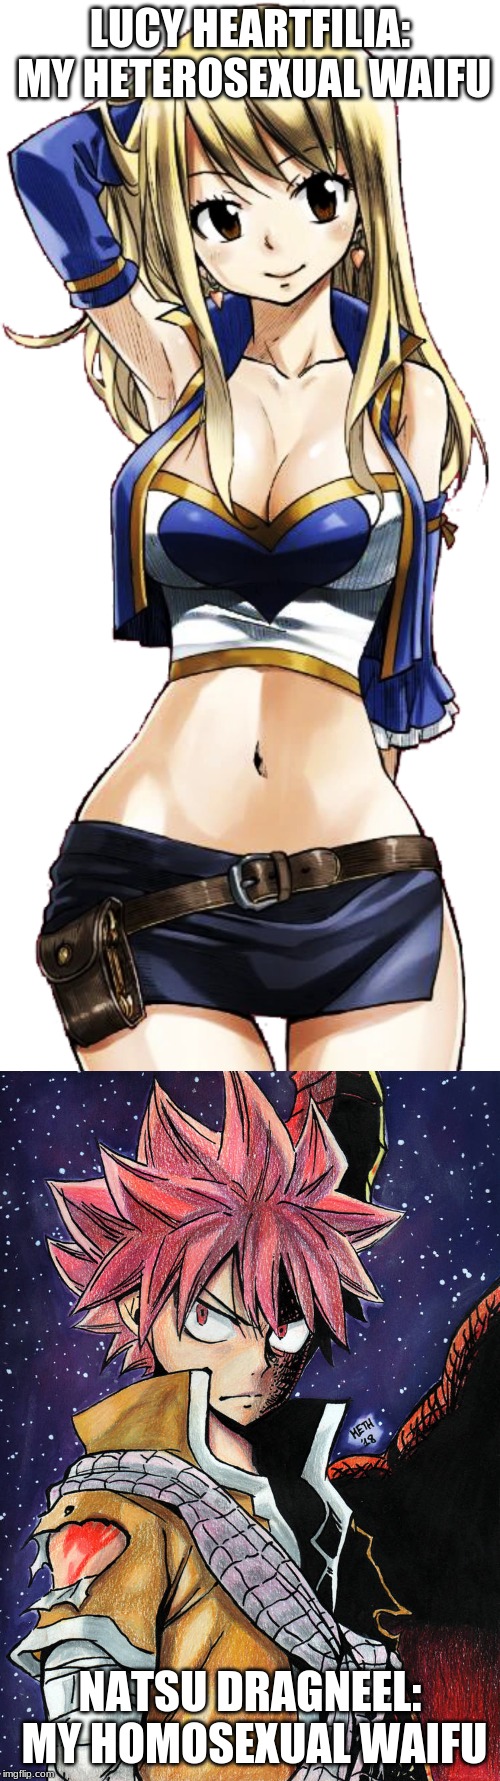 I Have Found My Heterosexual and Homosexual Waifus <3 | LUCY HEARTFILIA: MY HETEROSEXUAL WAIFU; NATSU DRAGNEEL: MY HOMOSEXUAL WAIFU | image tagged in lucy,natsu,fairy tail,anime,waifu,memes | made w/ Imgflip meme maker